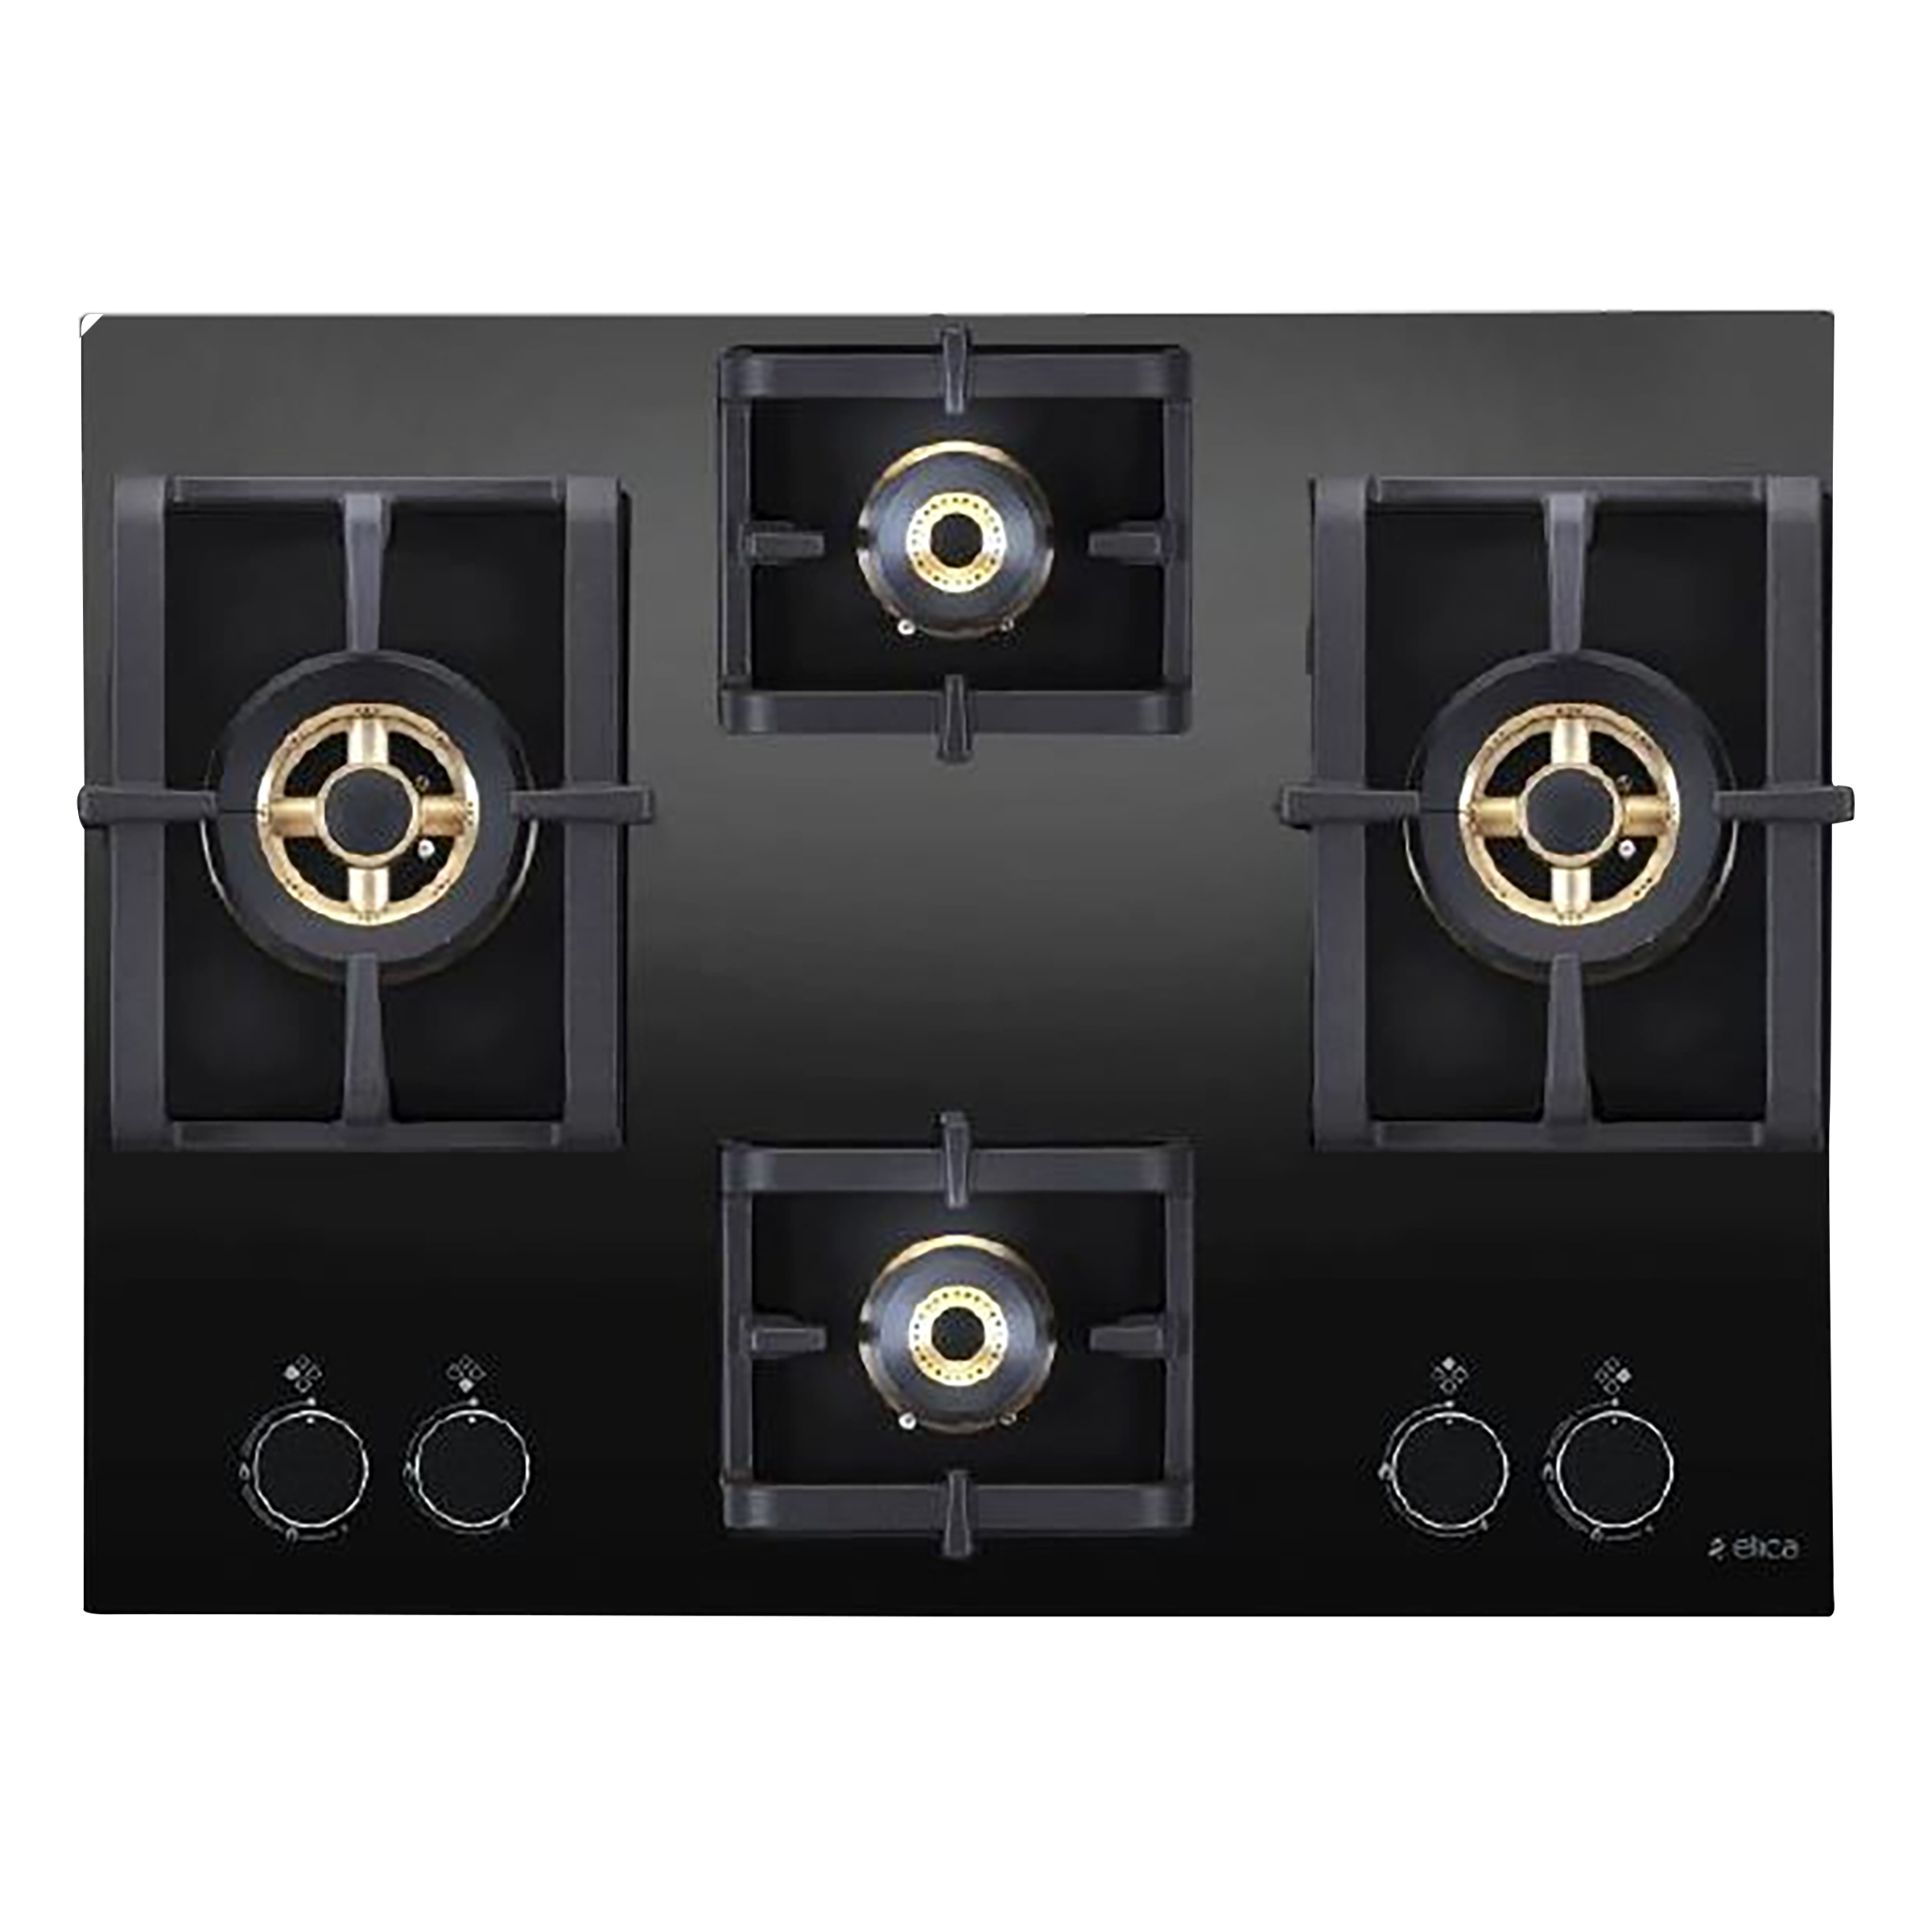 Elica Pro FB 4 Burner Glass Built-in Gas Hob (Electric Auto Ignition, 3145, Black)_1